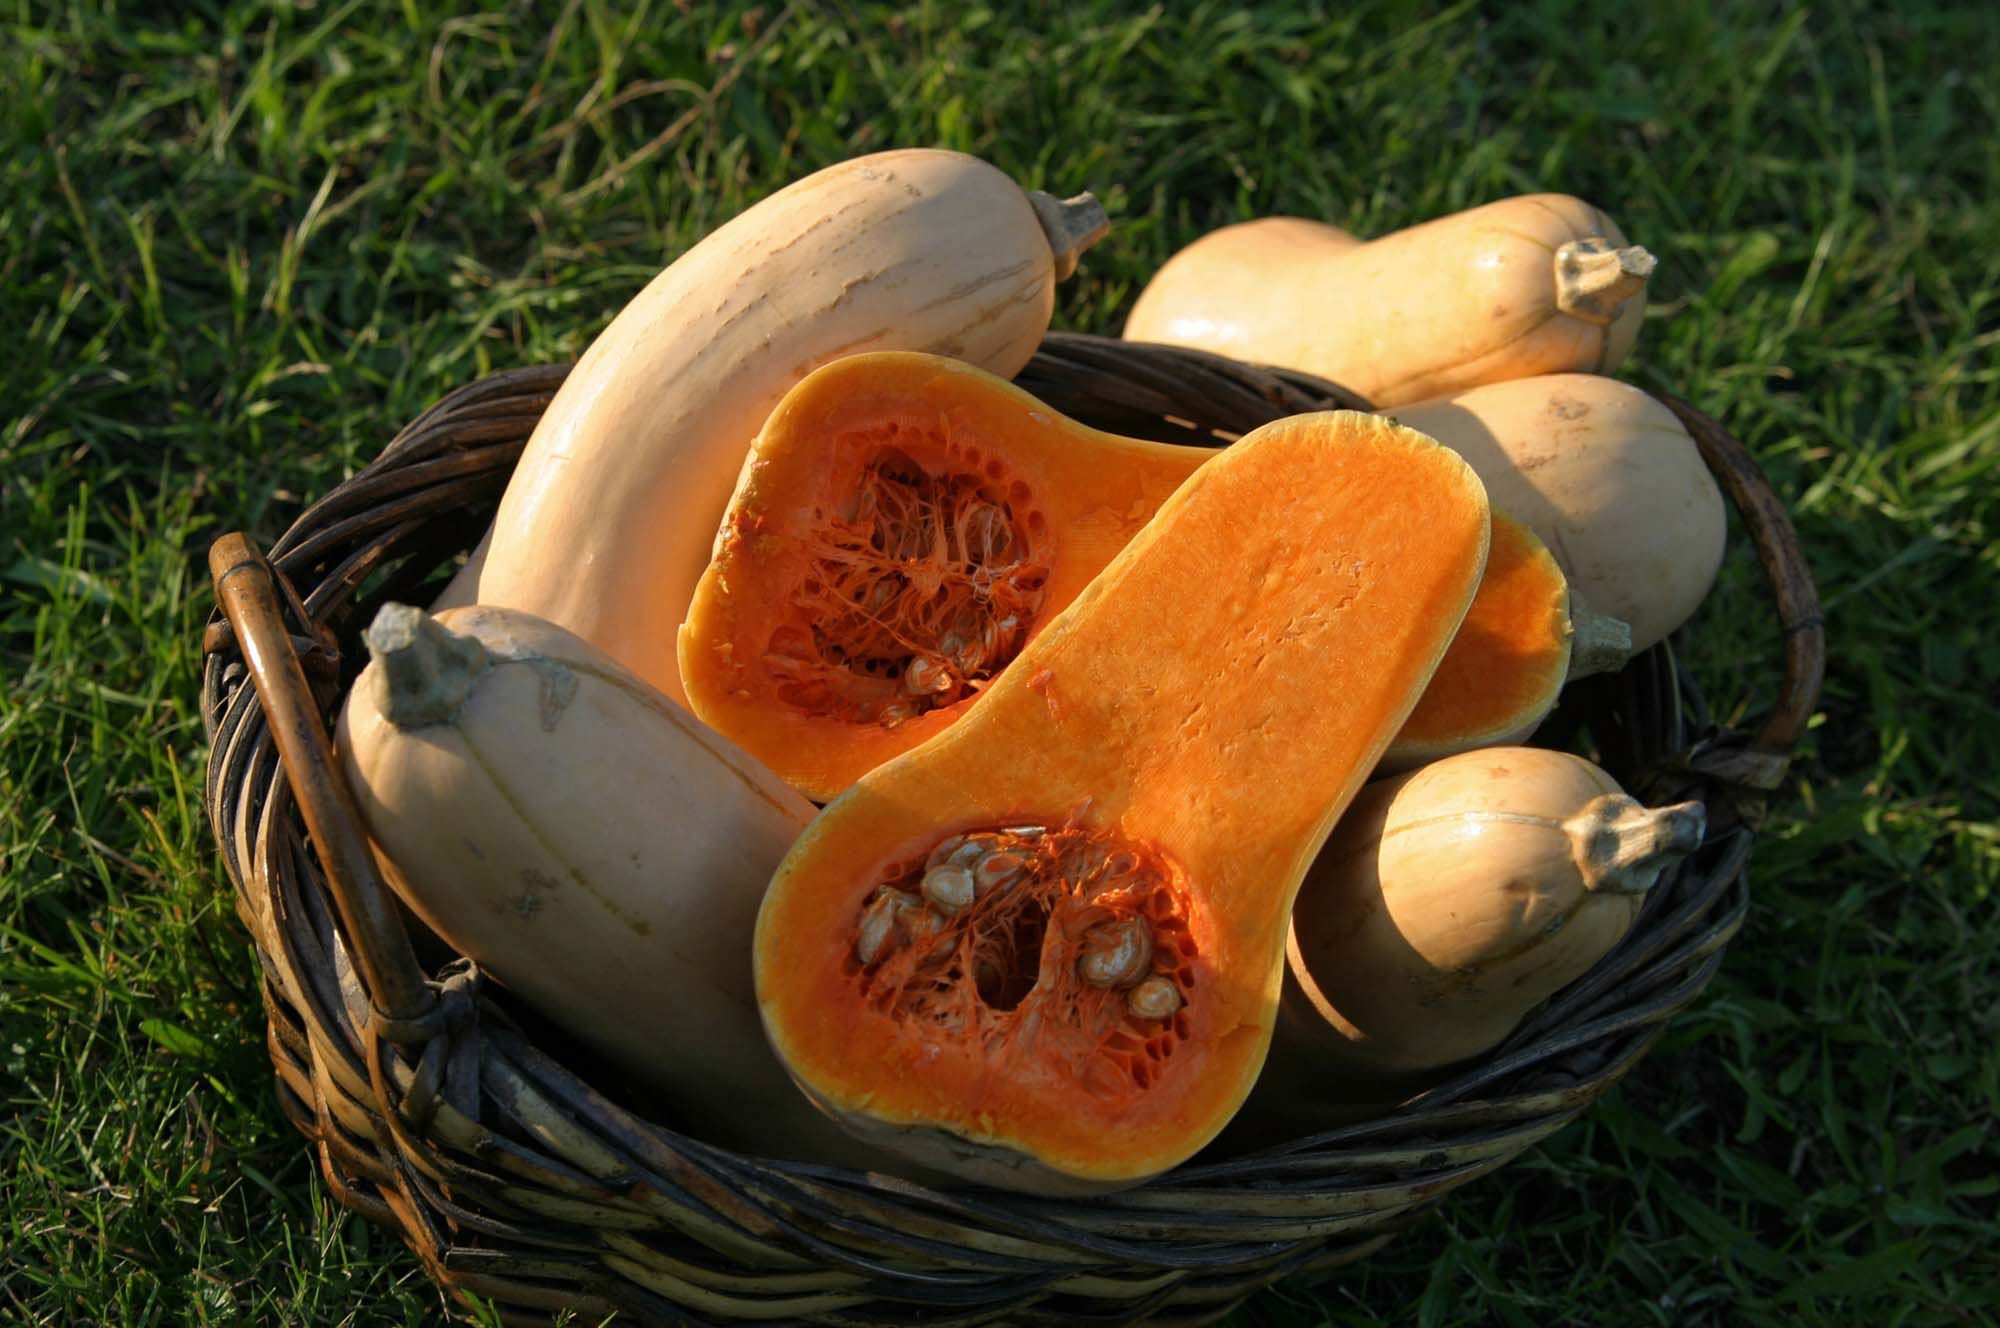 The natural sweetness of butternut squash makes it a wonderfully versatile ingredient.